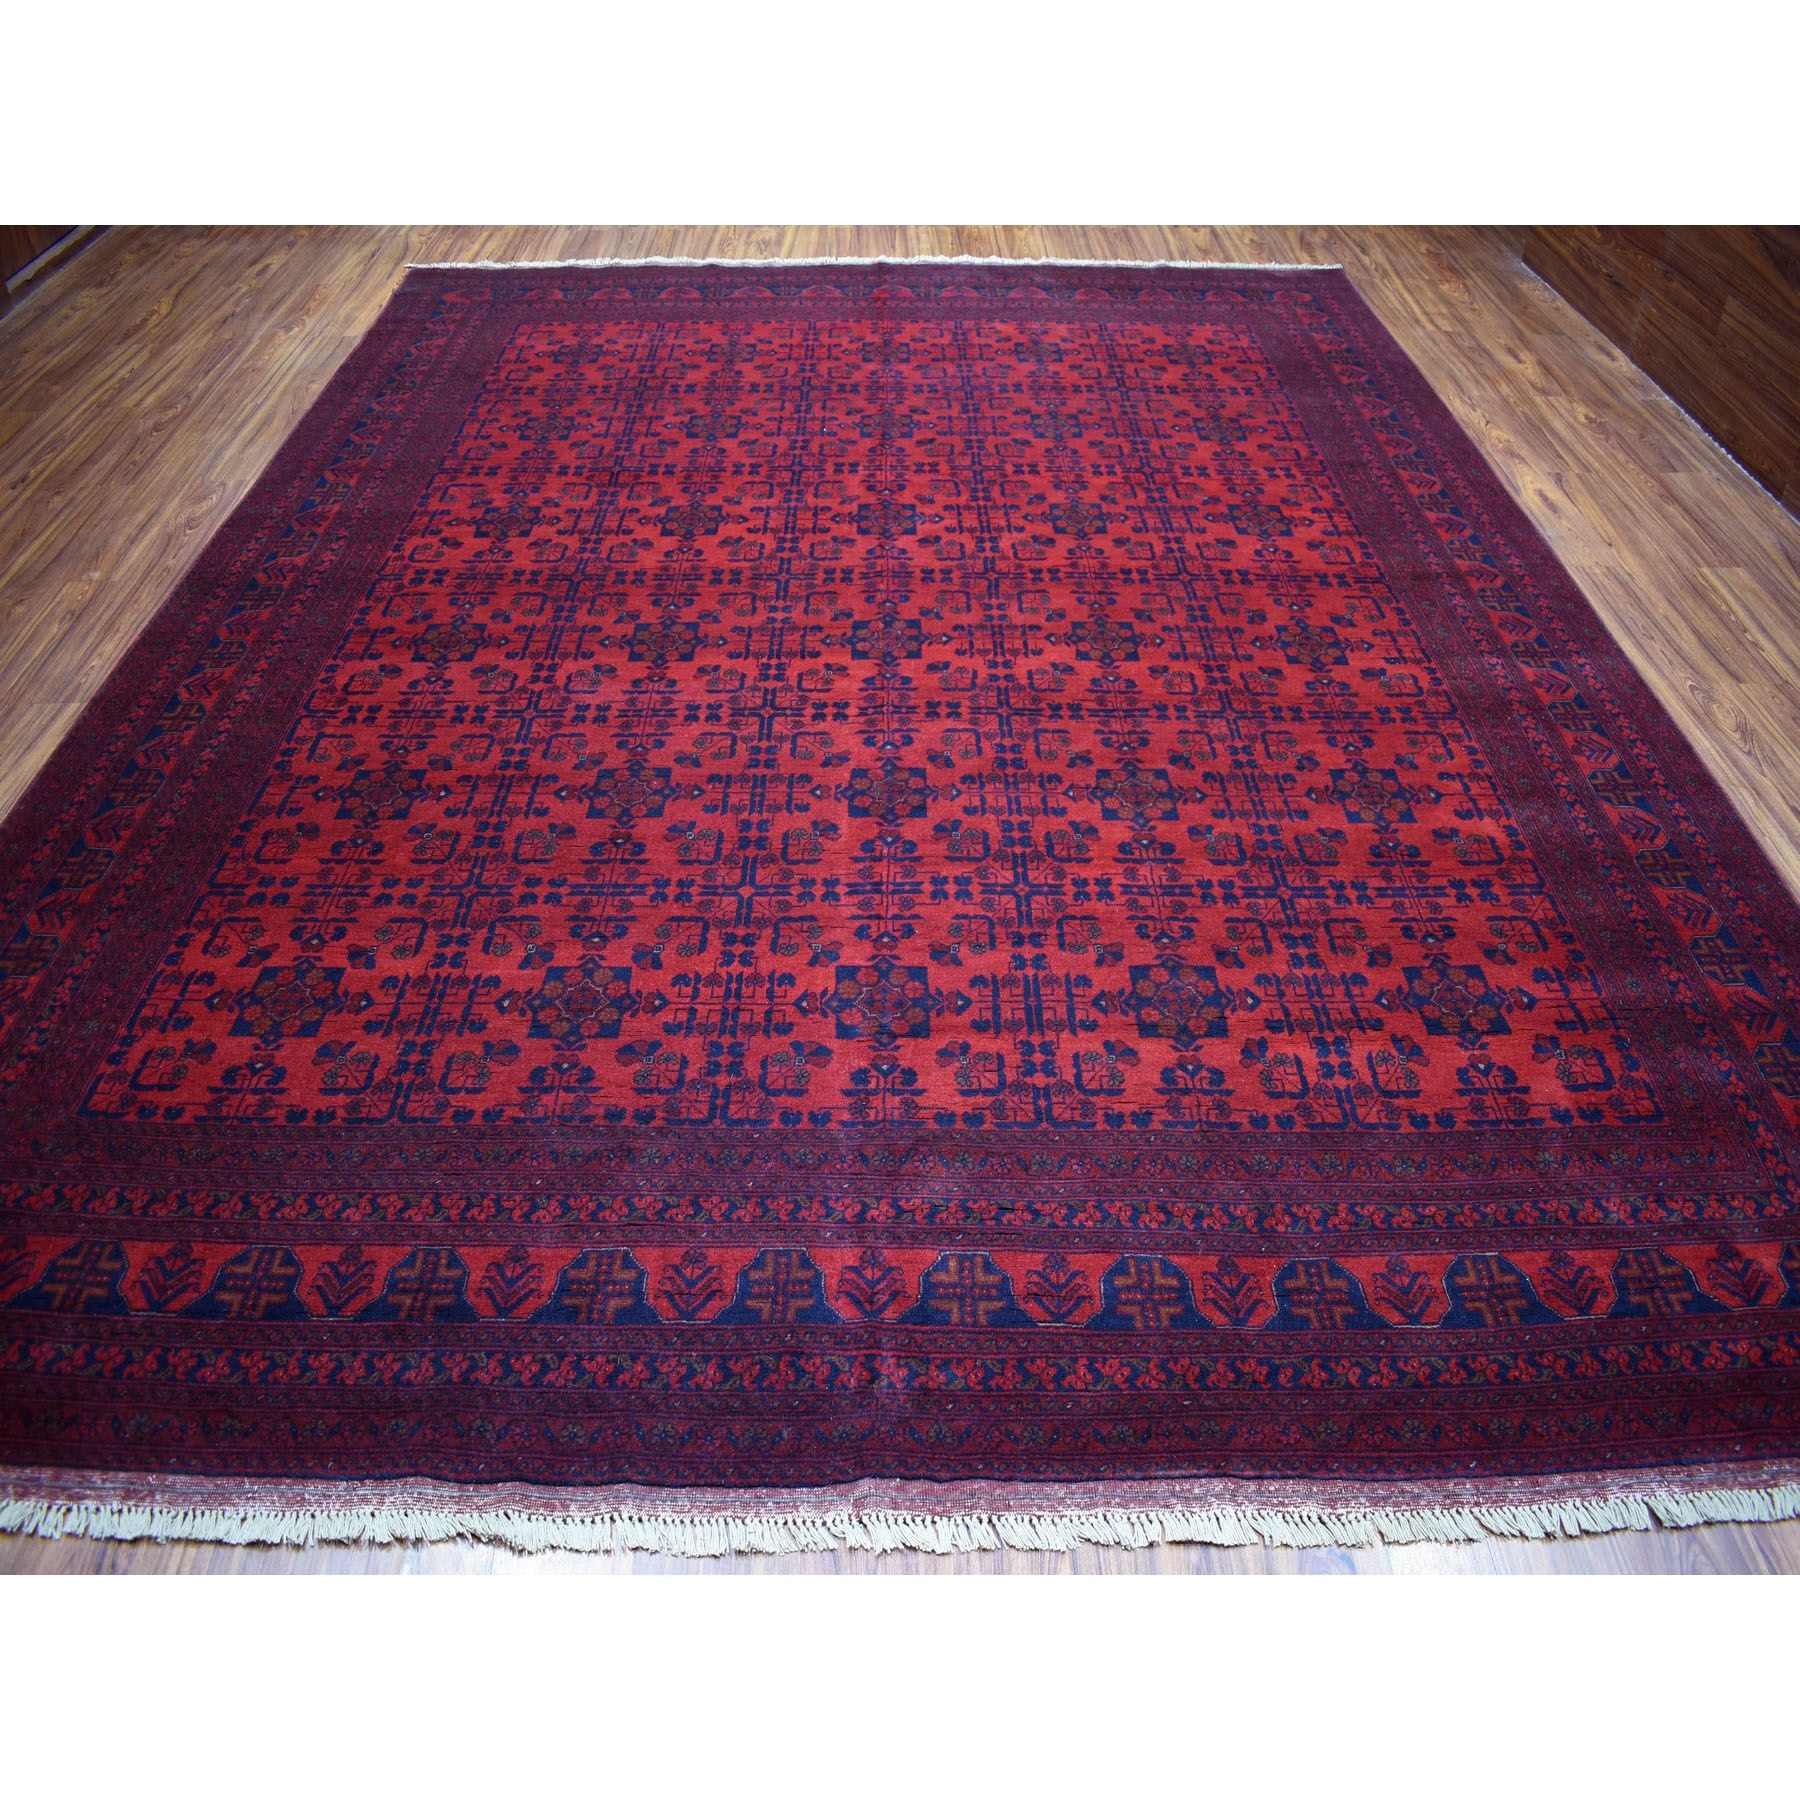 10-x12-7  Vintage Look Red Geometric Design Afghan Andkhoy Pure Wool Hand-Knotted Oriental Rug 